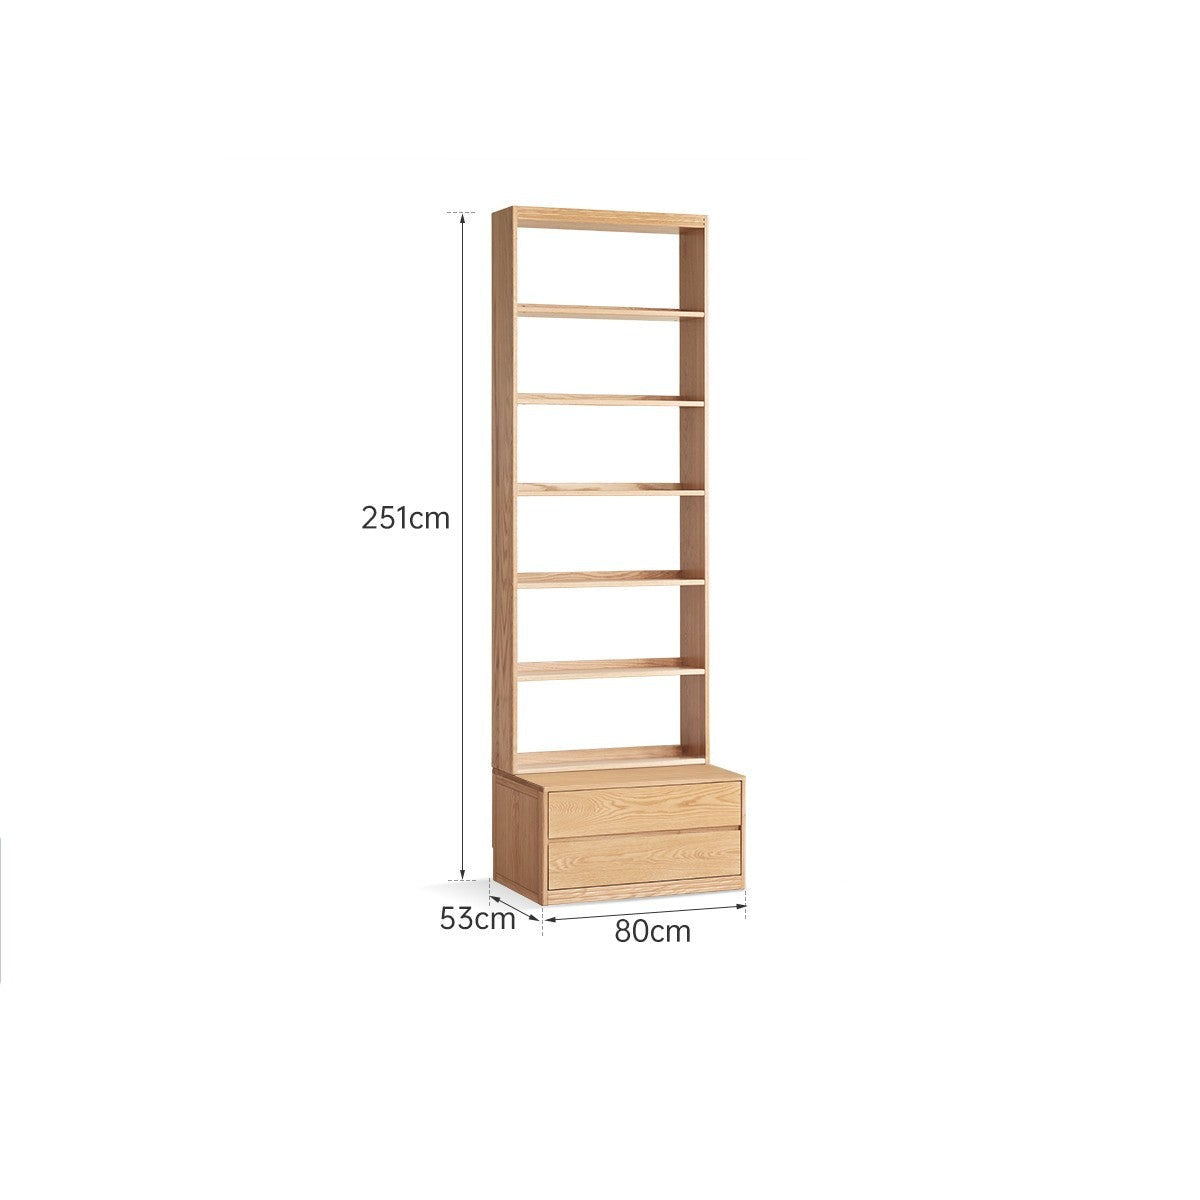 Oak solid wood wall-to-wall with seat combined bookshelf-